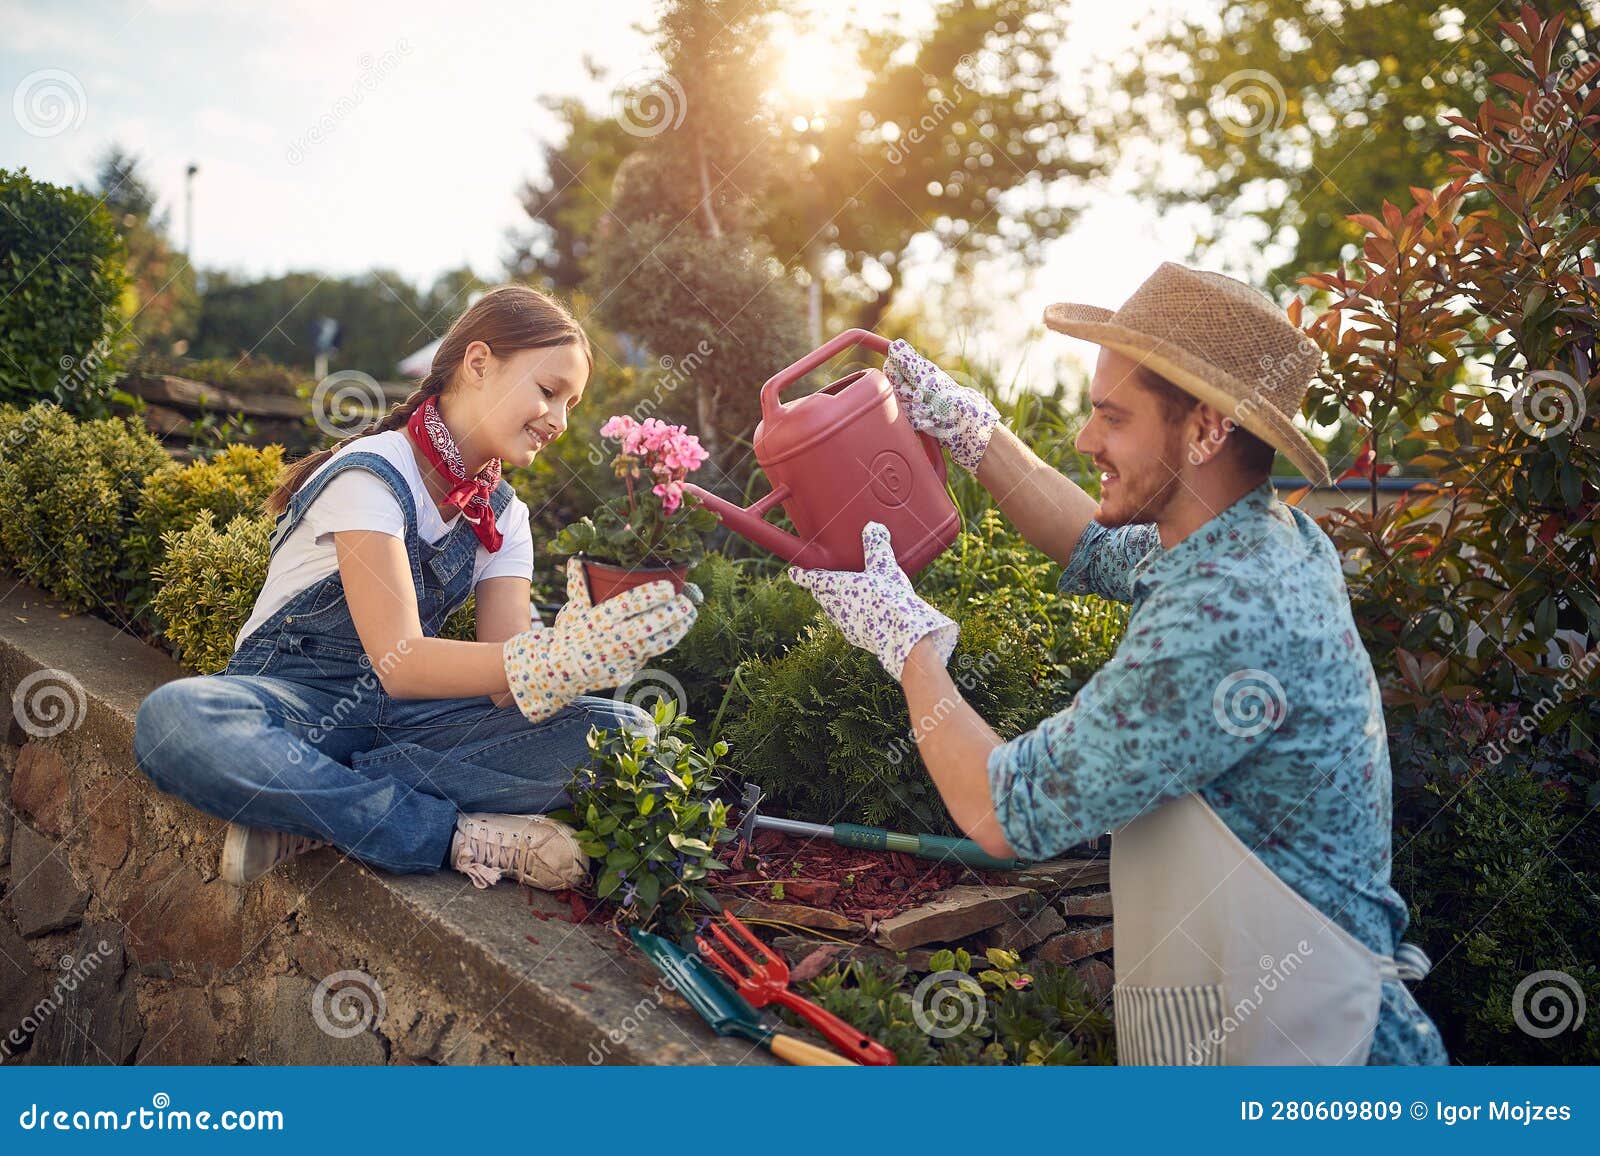 daugther and father working together in the flower garden outdoors, girl holding a flower pot, man watering it with watercan